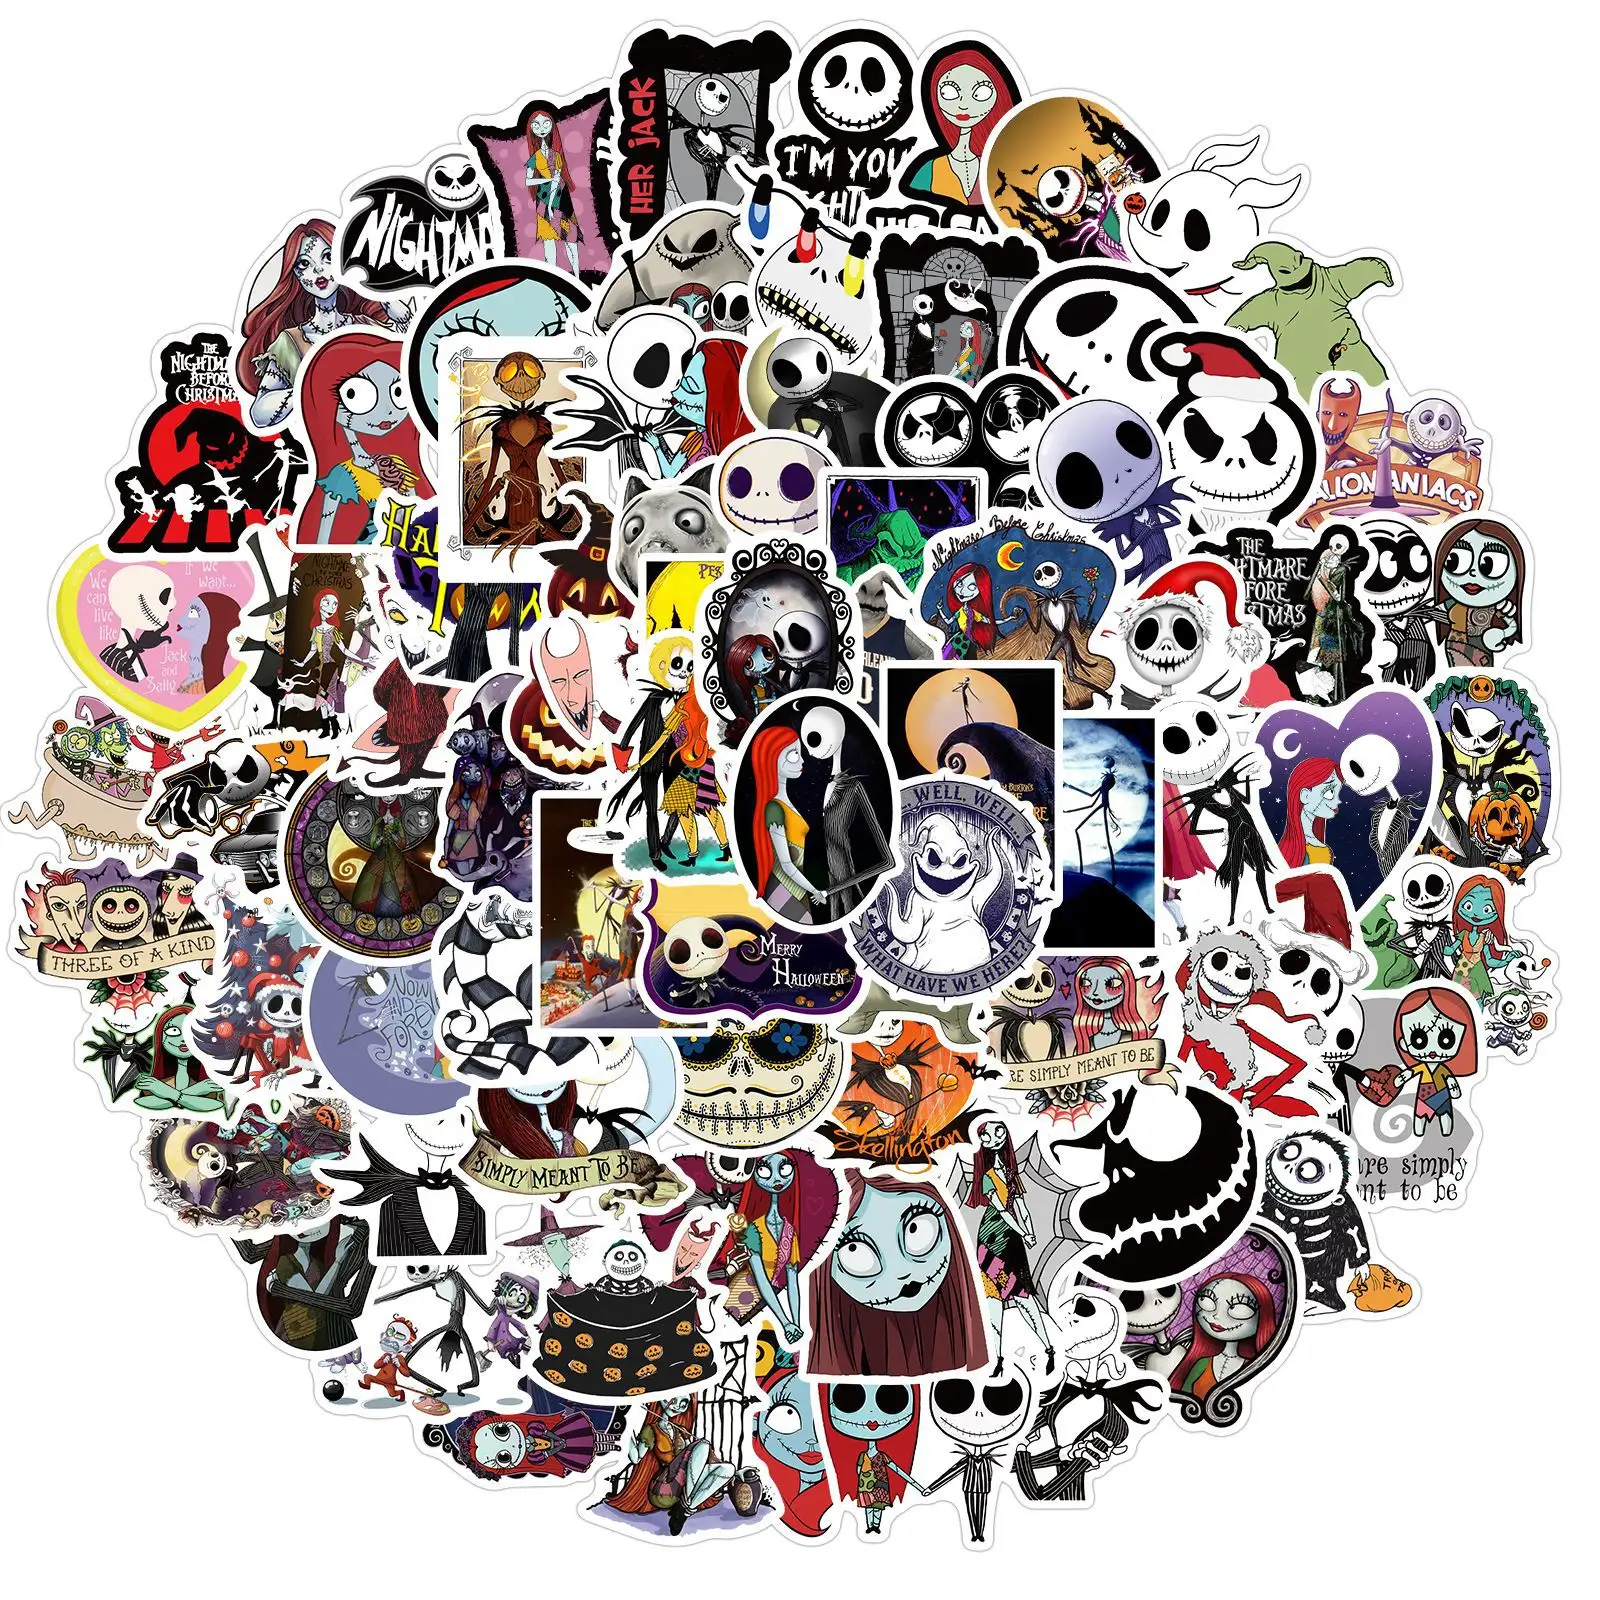 100Pcs Movie The Nightmare Before Christmas Decorative Stickers For Laptop Car Wall Waterproof Halloween Sticker